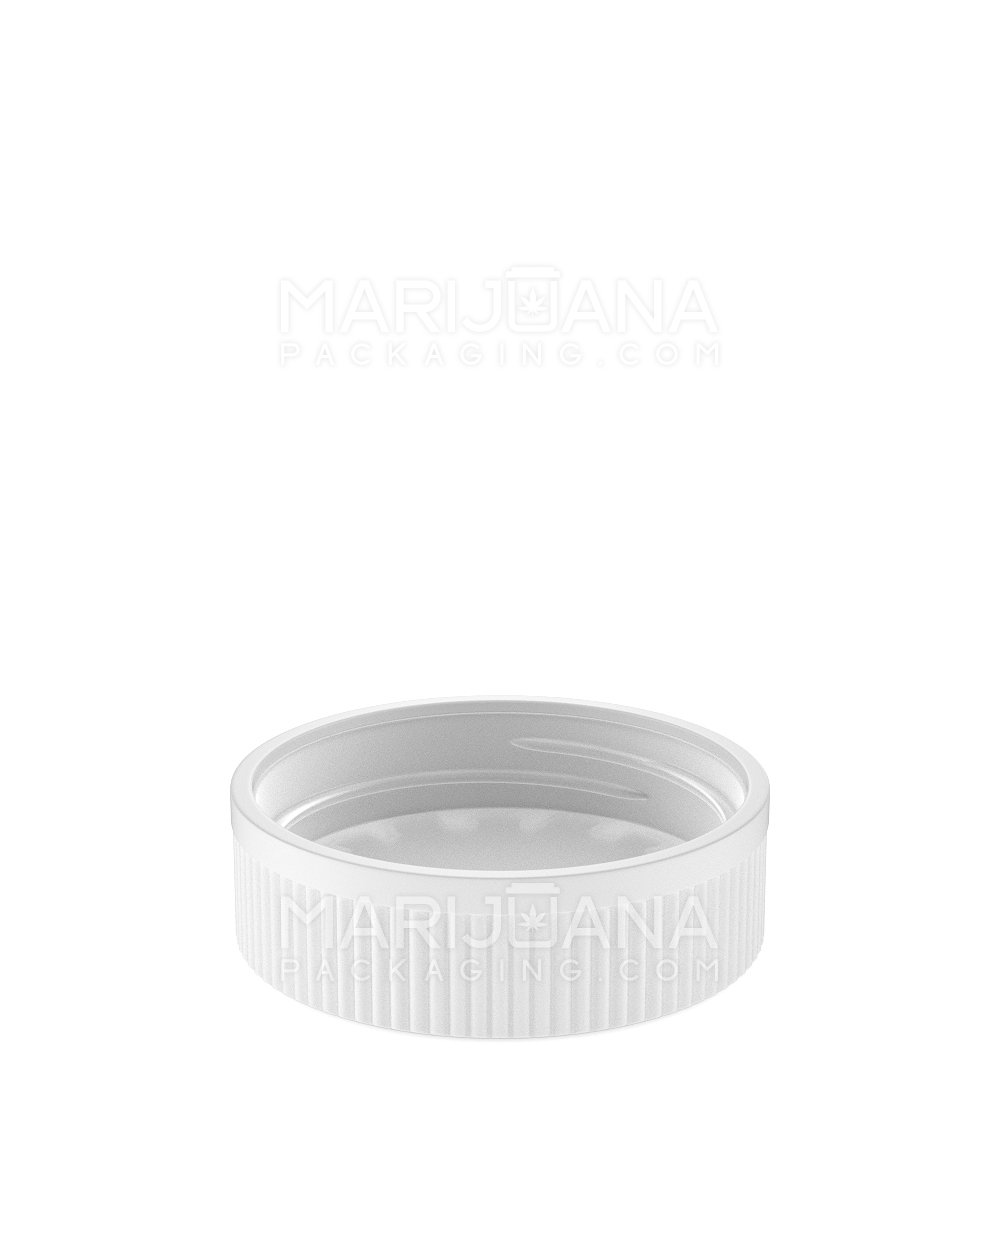 Child Resistant | Ribbed Push Down & Turn Plastic Caps | 53mm - Matte White - 120 Count - 4